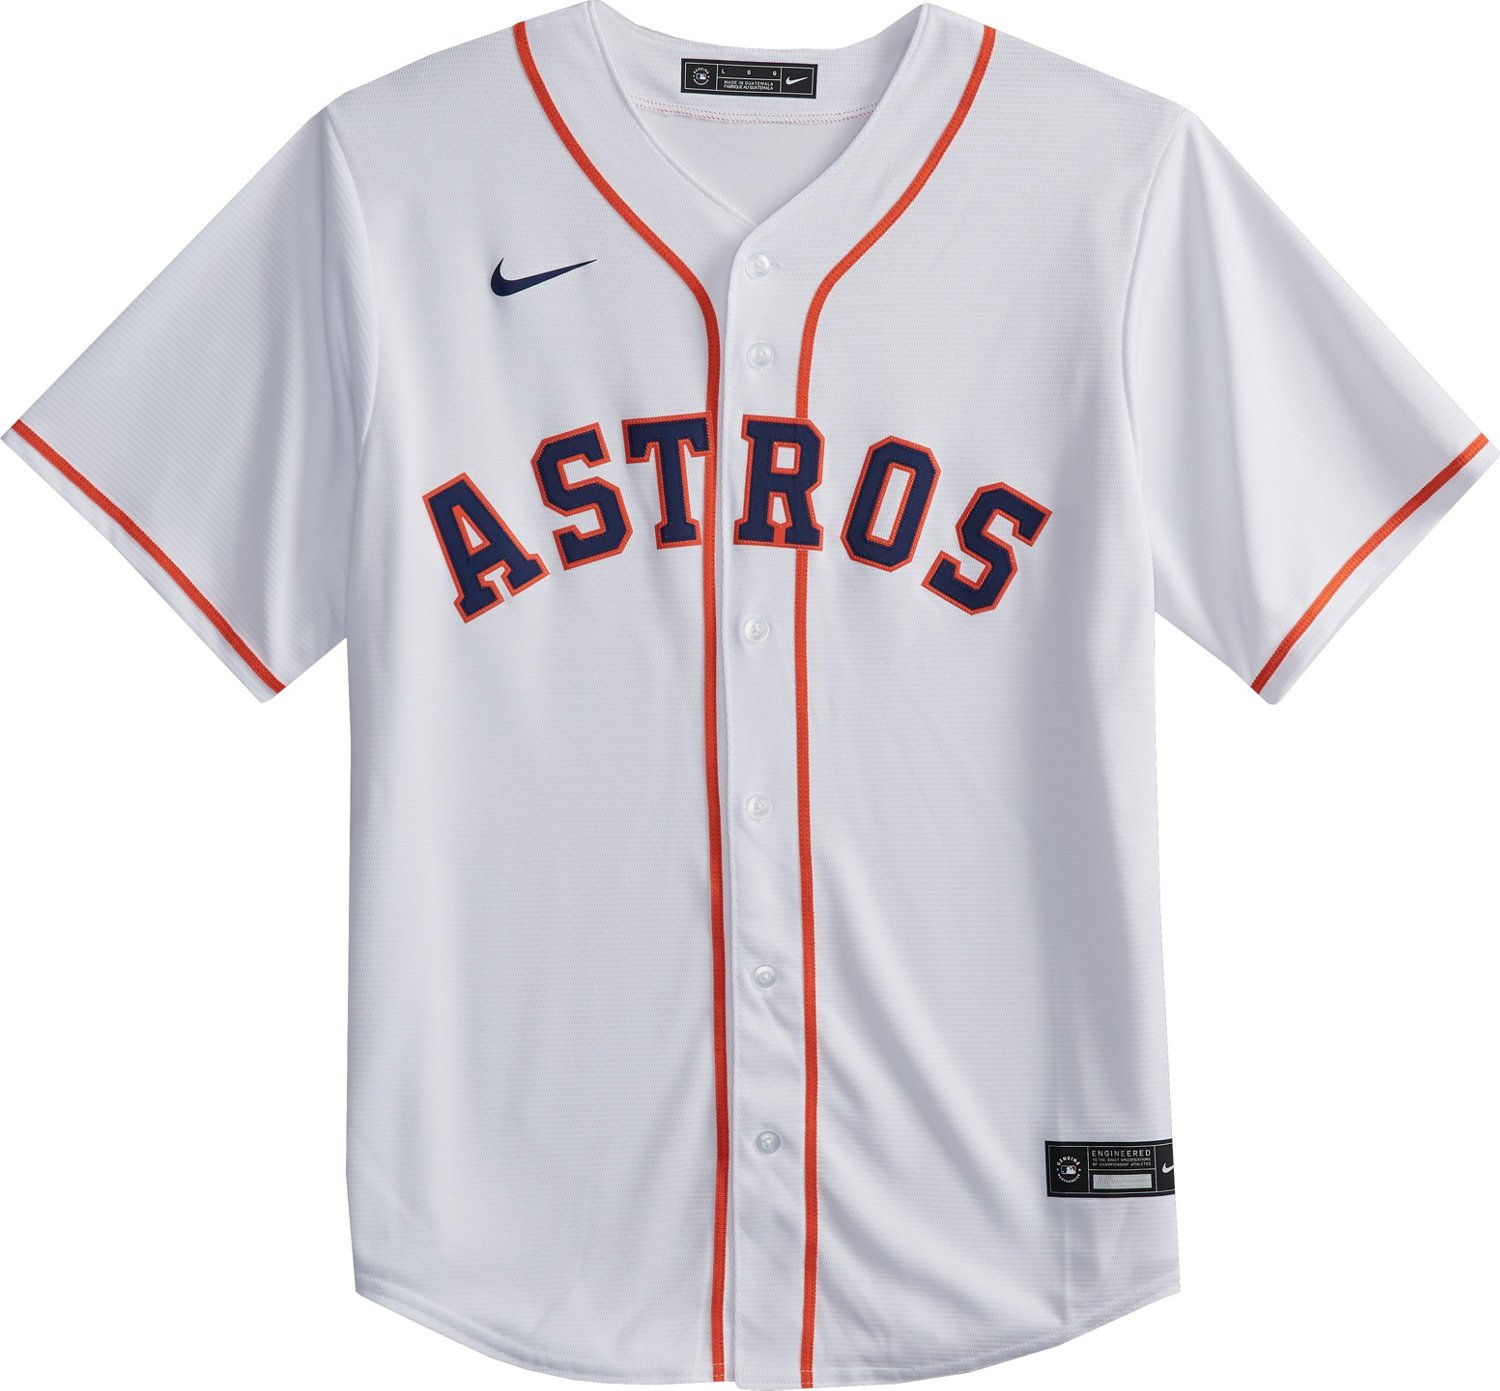 astros jersey at academy, Off 67%